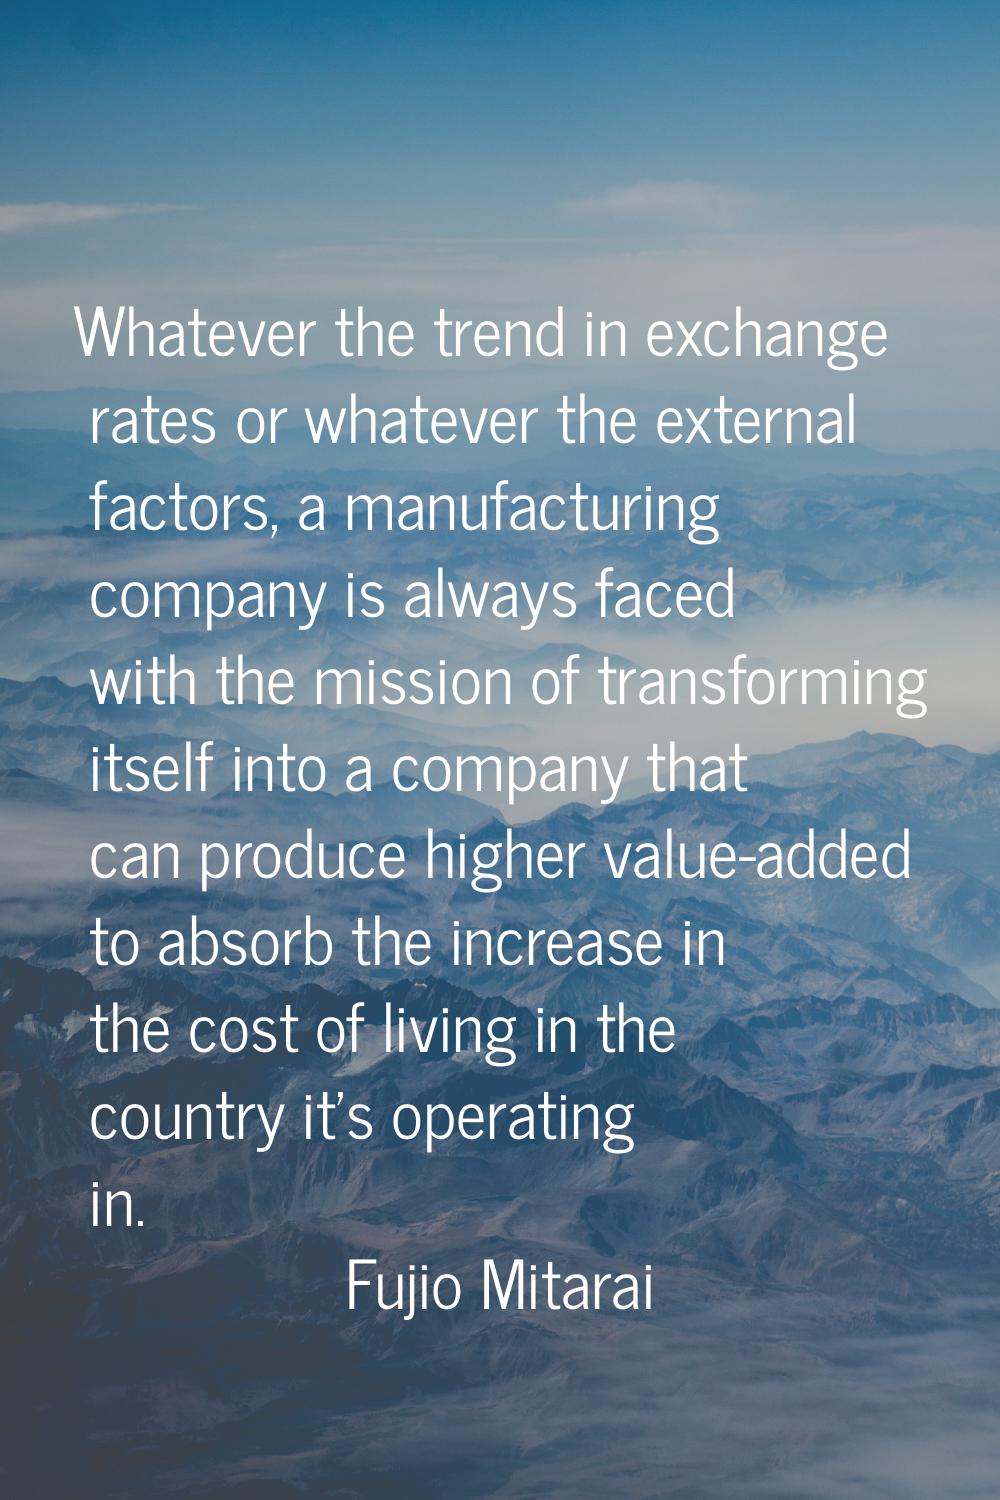 Whatever the trend in exchange rates or whatever the external factors, a manufacturing company is a